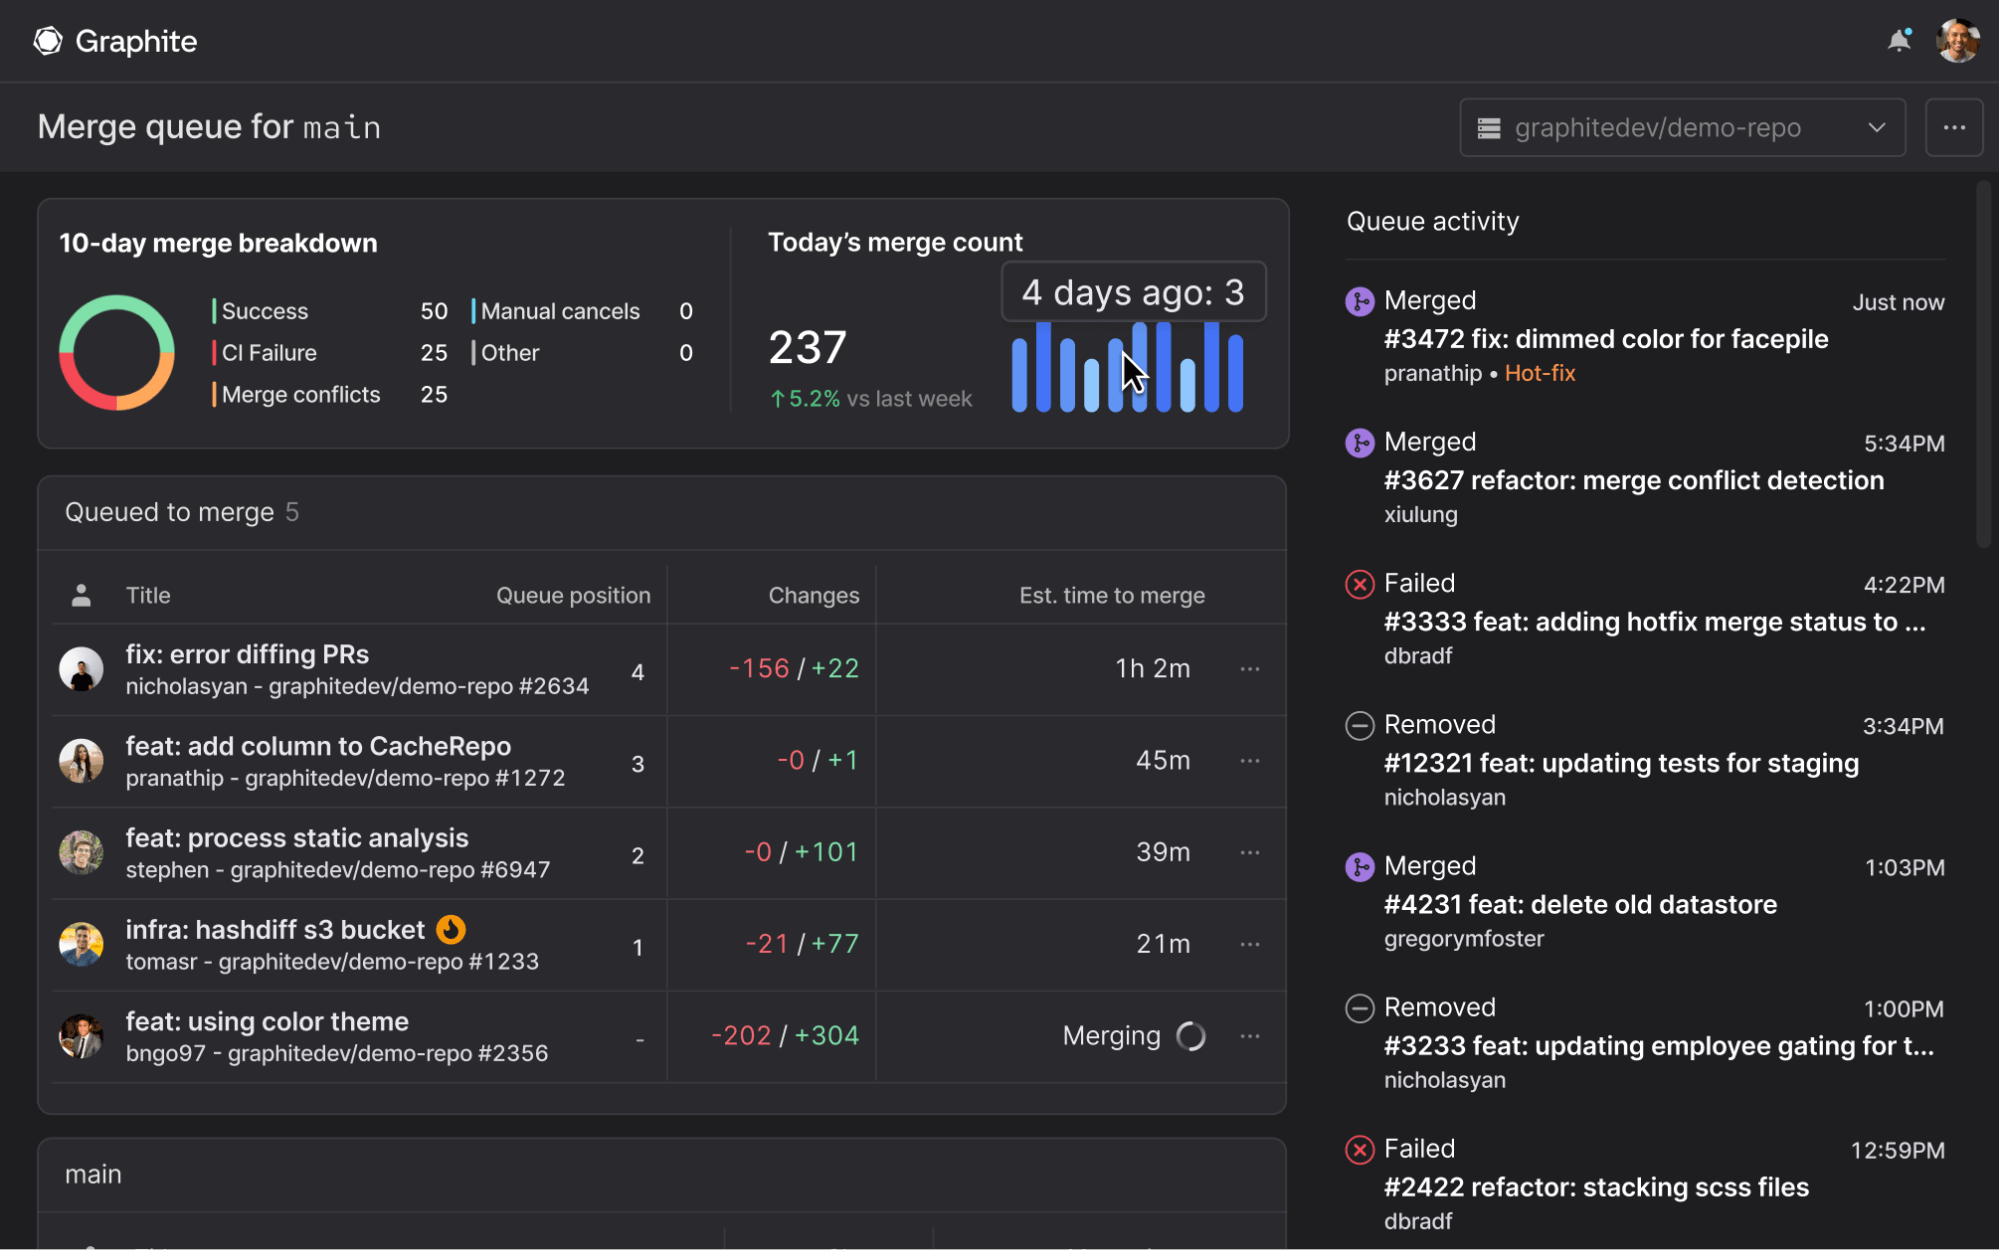 Graphite dashboard screenshot showing a 10-day merge breakdown, queue to merge, and a queue activity in the right-hand feed